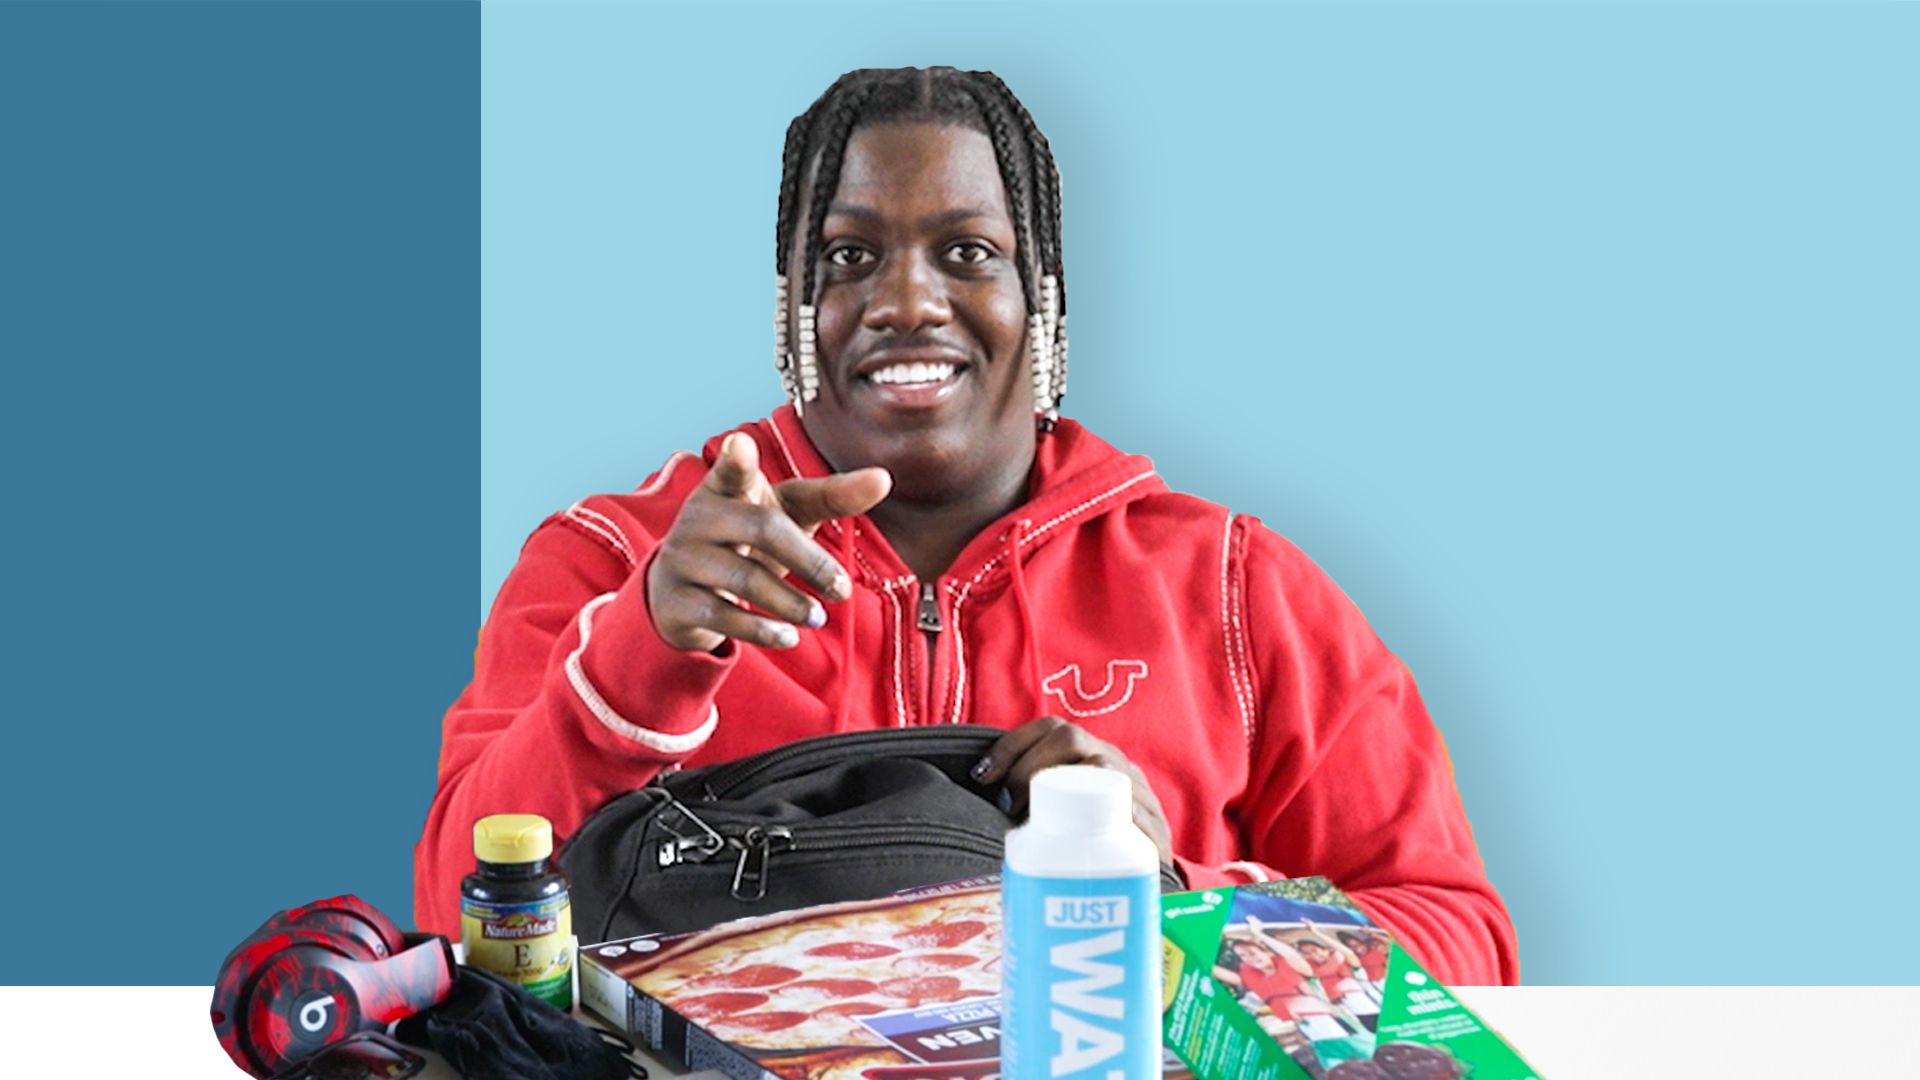 Watch 10 Things Lil Yachty Can't Live Without, 10 Essentials